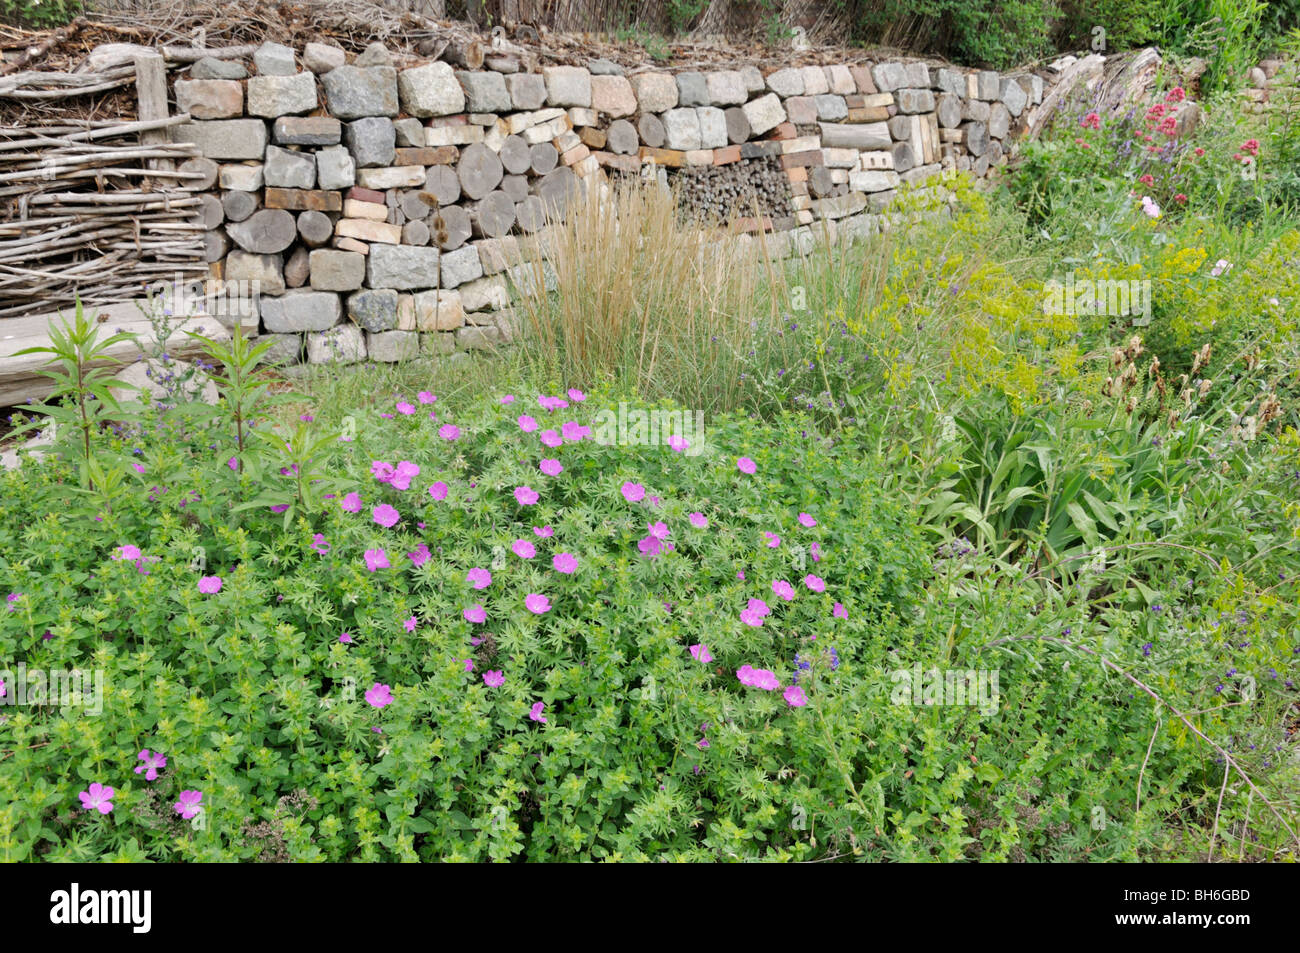 Perennial garden with dry stone wall Stock Photo